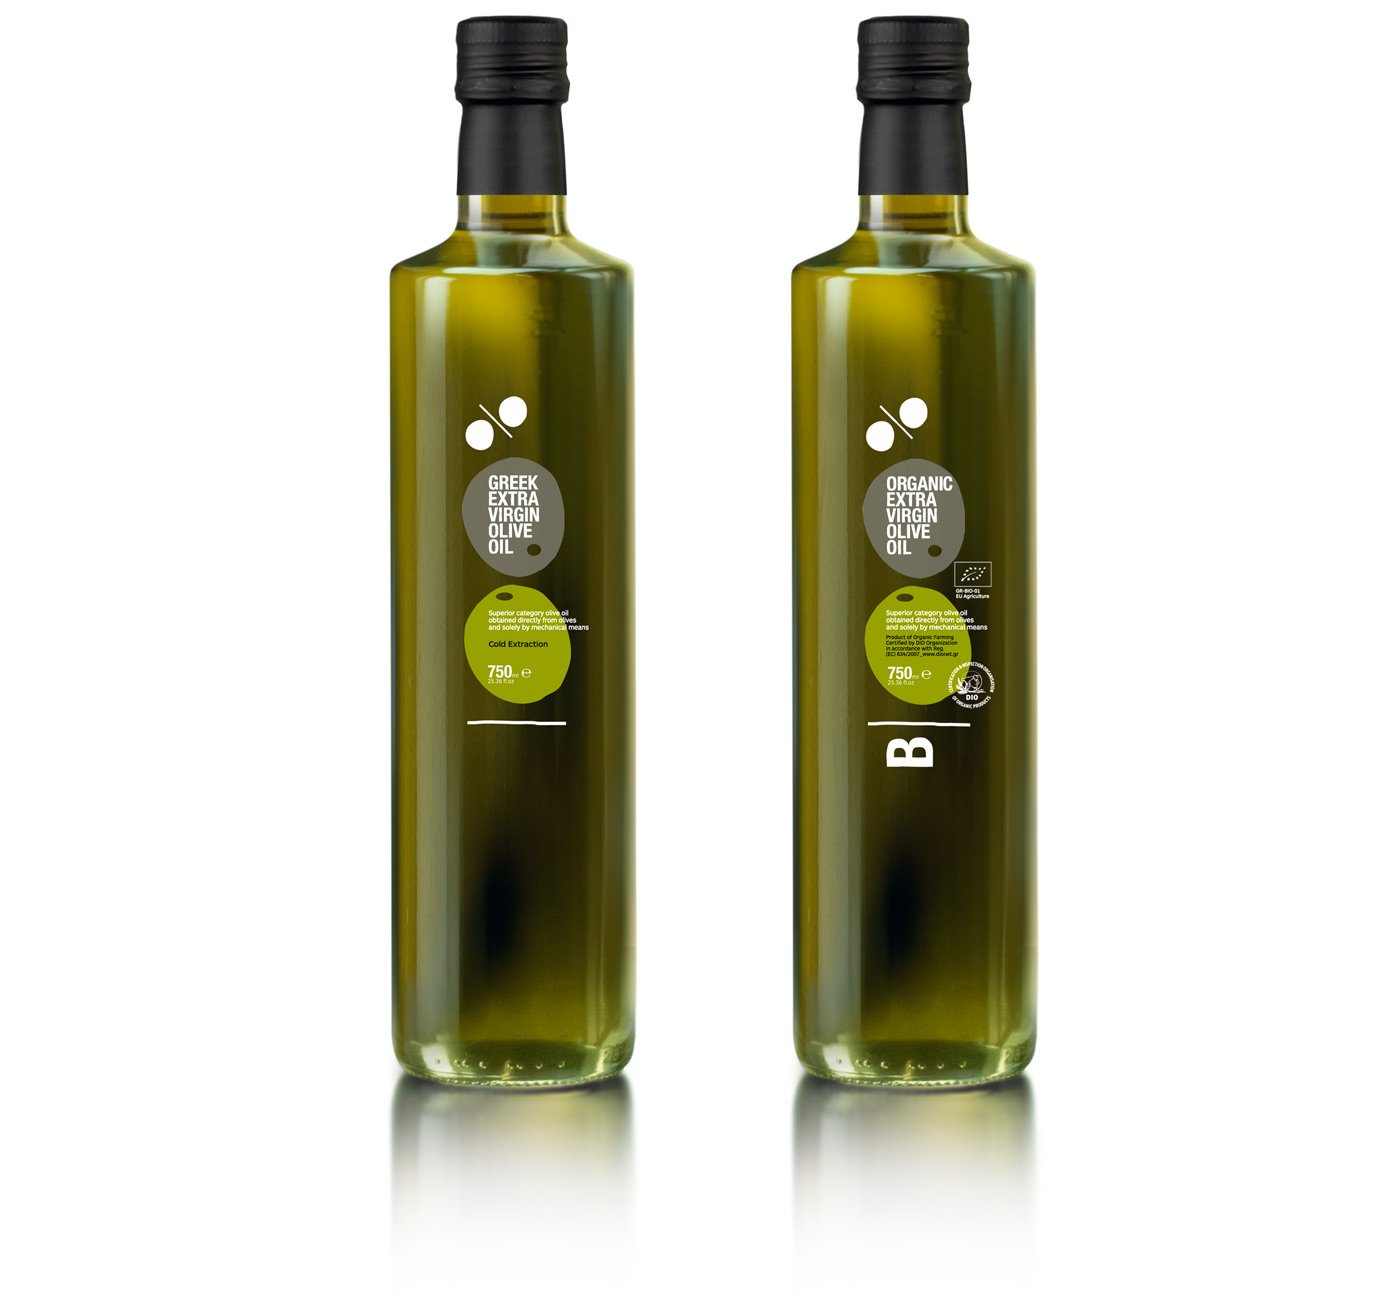 A bottle of olive oil. Extra Virgin Olive Oil Bottle. Оливковое масло Органик Греция. Оливковое масло 750 ml Extra Virgin la Tourangelle. Olive Oil масло оливковое.